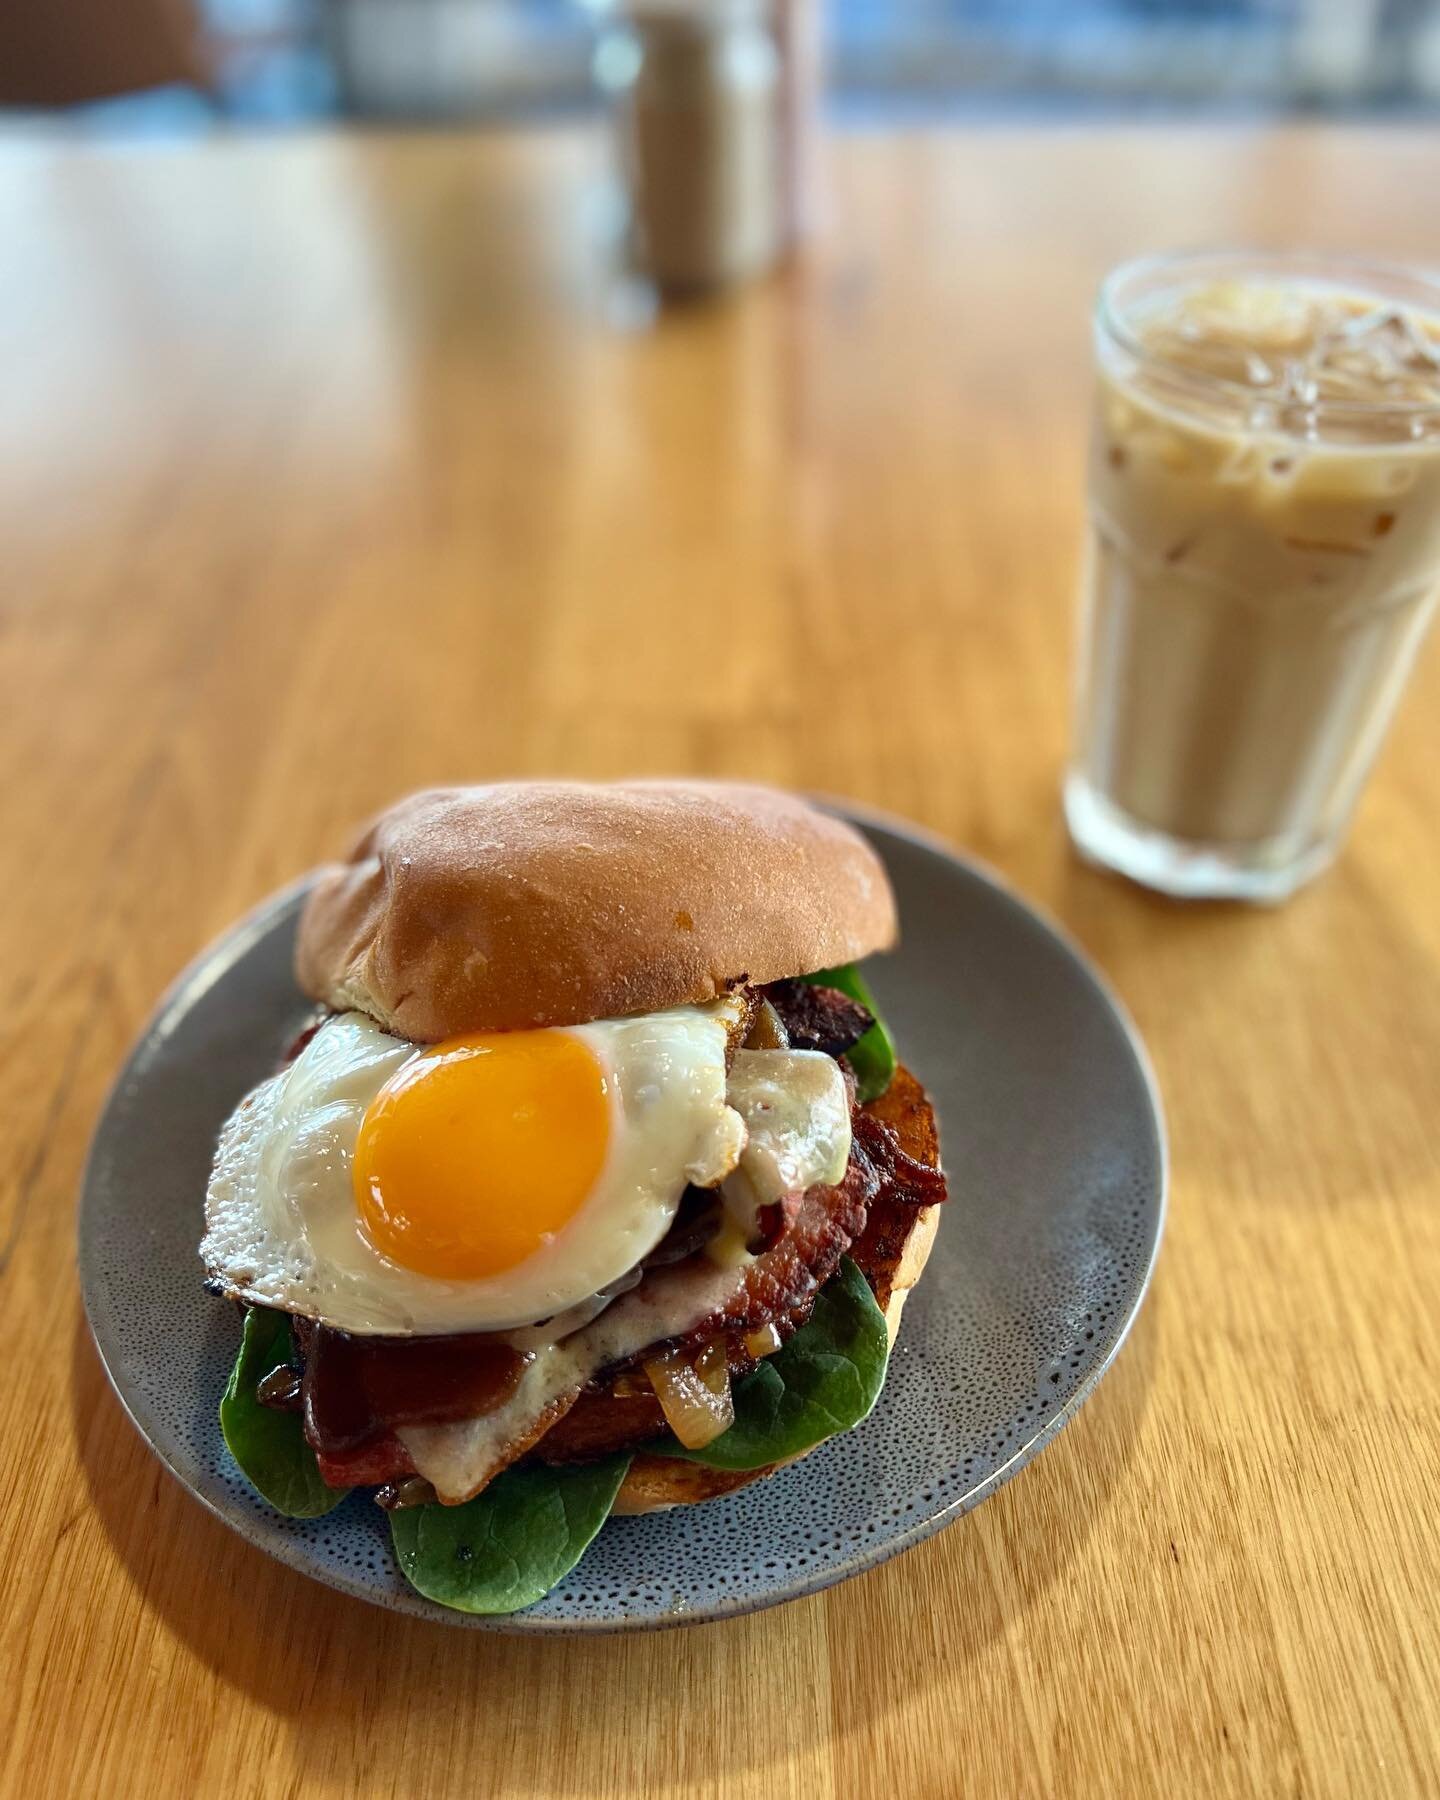 Breaky burger special on this week  Bacon egg roll with caramelised onion, house made potato Rosti, baby spinach, cheese and BBQ sauce  Goes great with or new oat cold brew coffee #breakyburger #breakfast #cokdbrew #tuncurry #forster #barringtoncoast